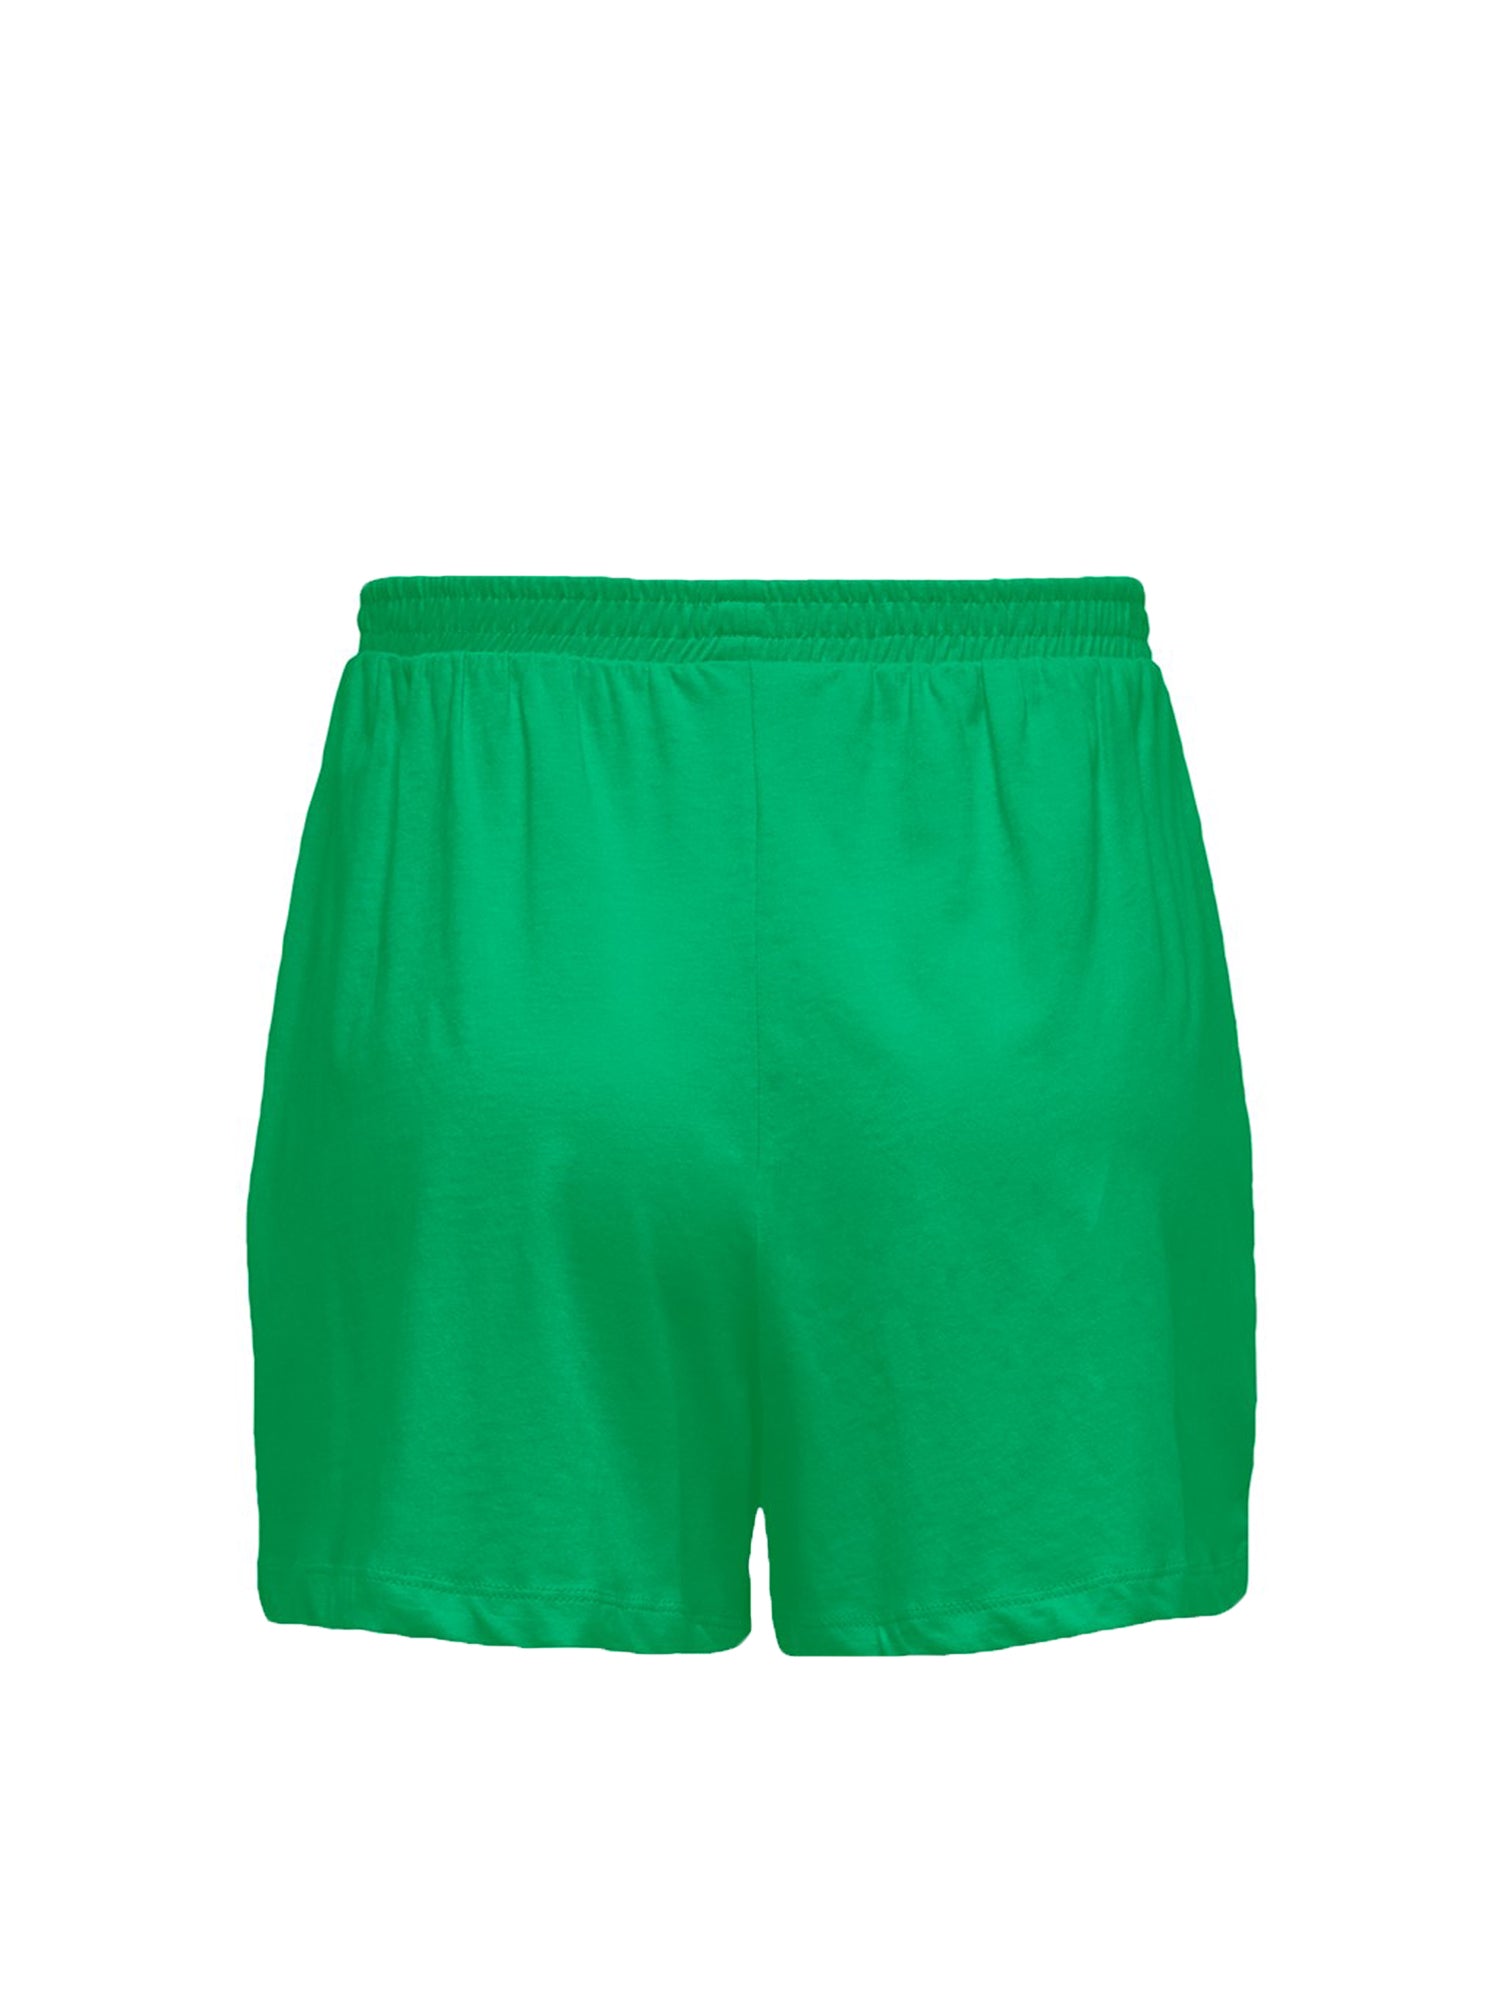 ONLY SHORTS BOX VERDE